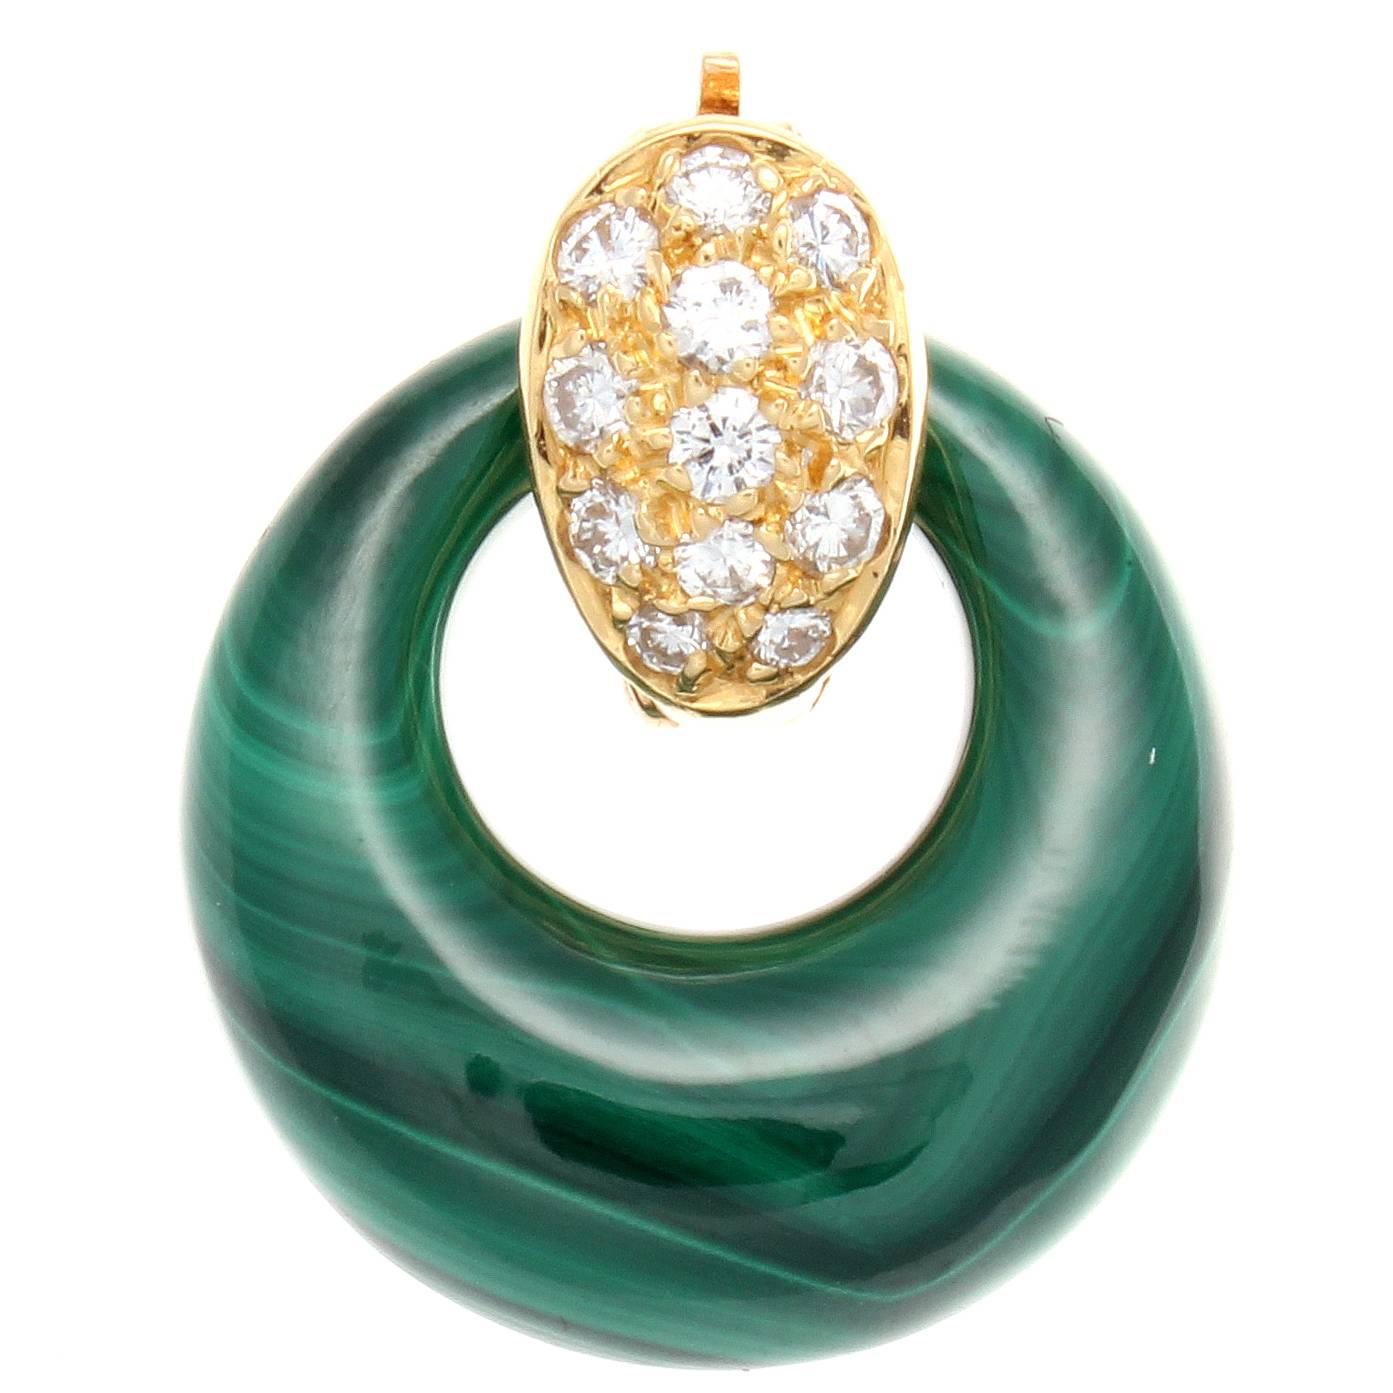 Van Cleef & Arpels, a long rich history of trend setting fashion that is still relevant today. Featuring a textured gold pendant that has been embedded by numerous near colorless diamonds that clasps the interchangeable pendents of malachite, lapis